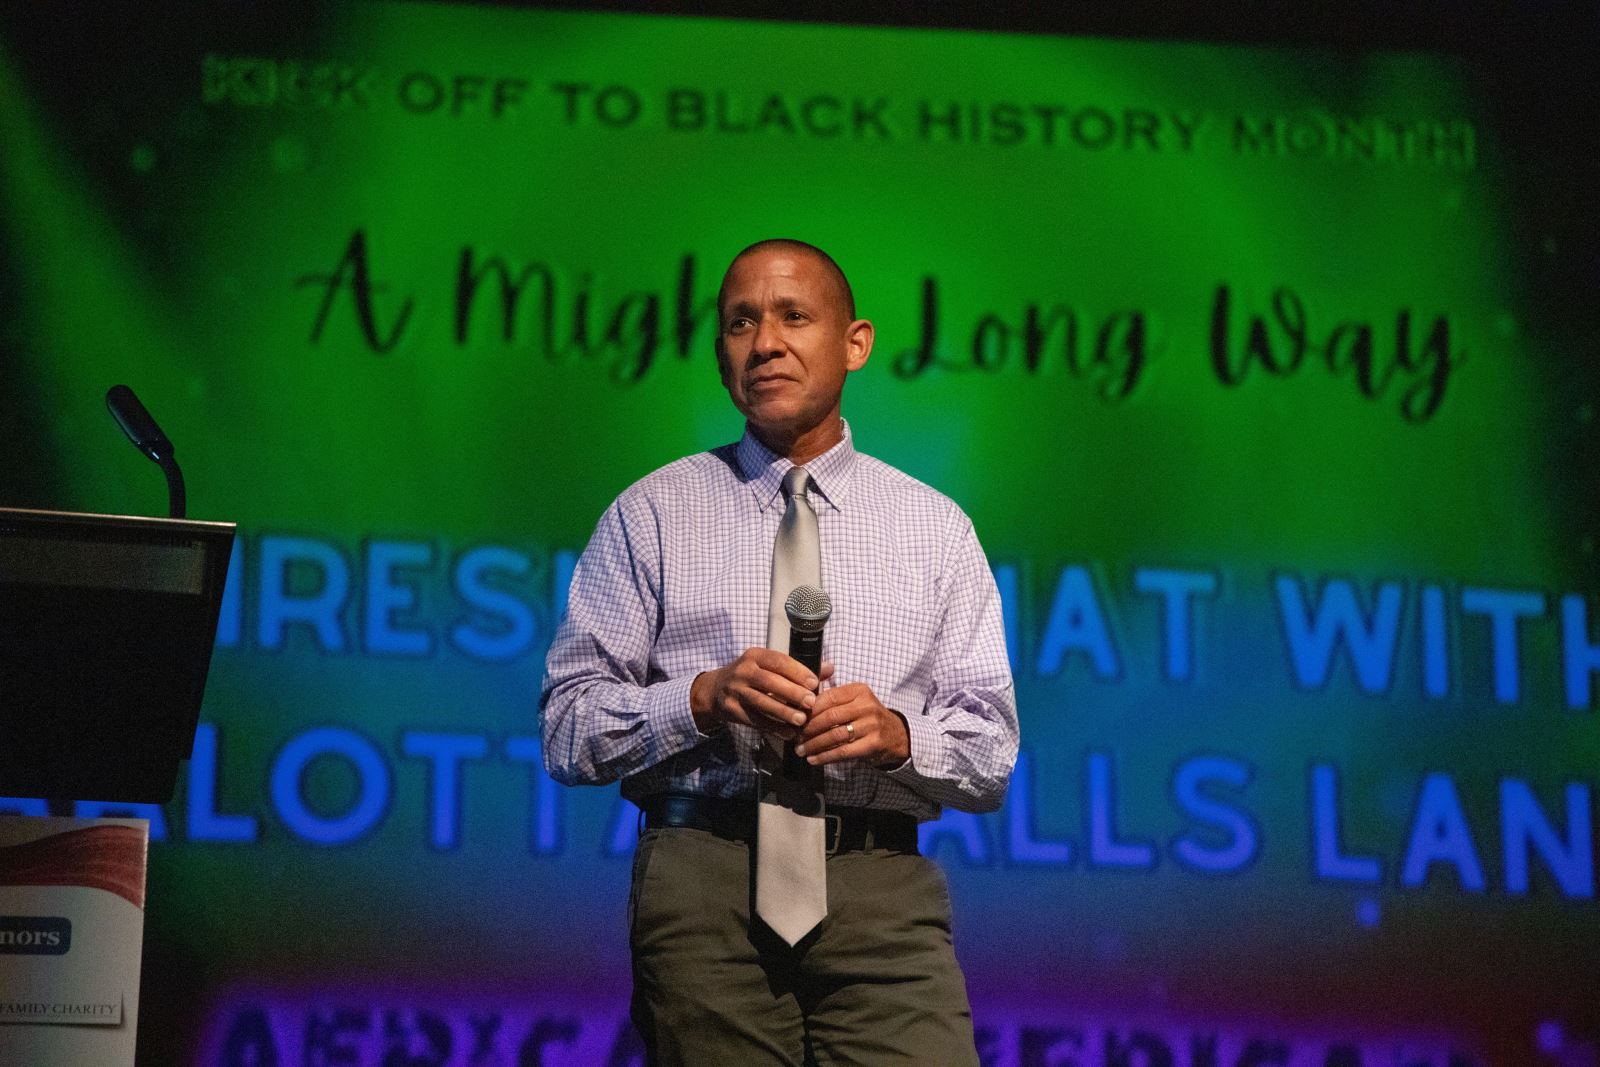 Dr. Trujillo looks out at the audience at the Black History Month kickoff event